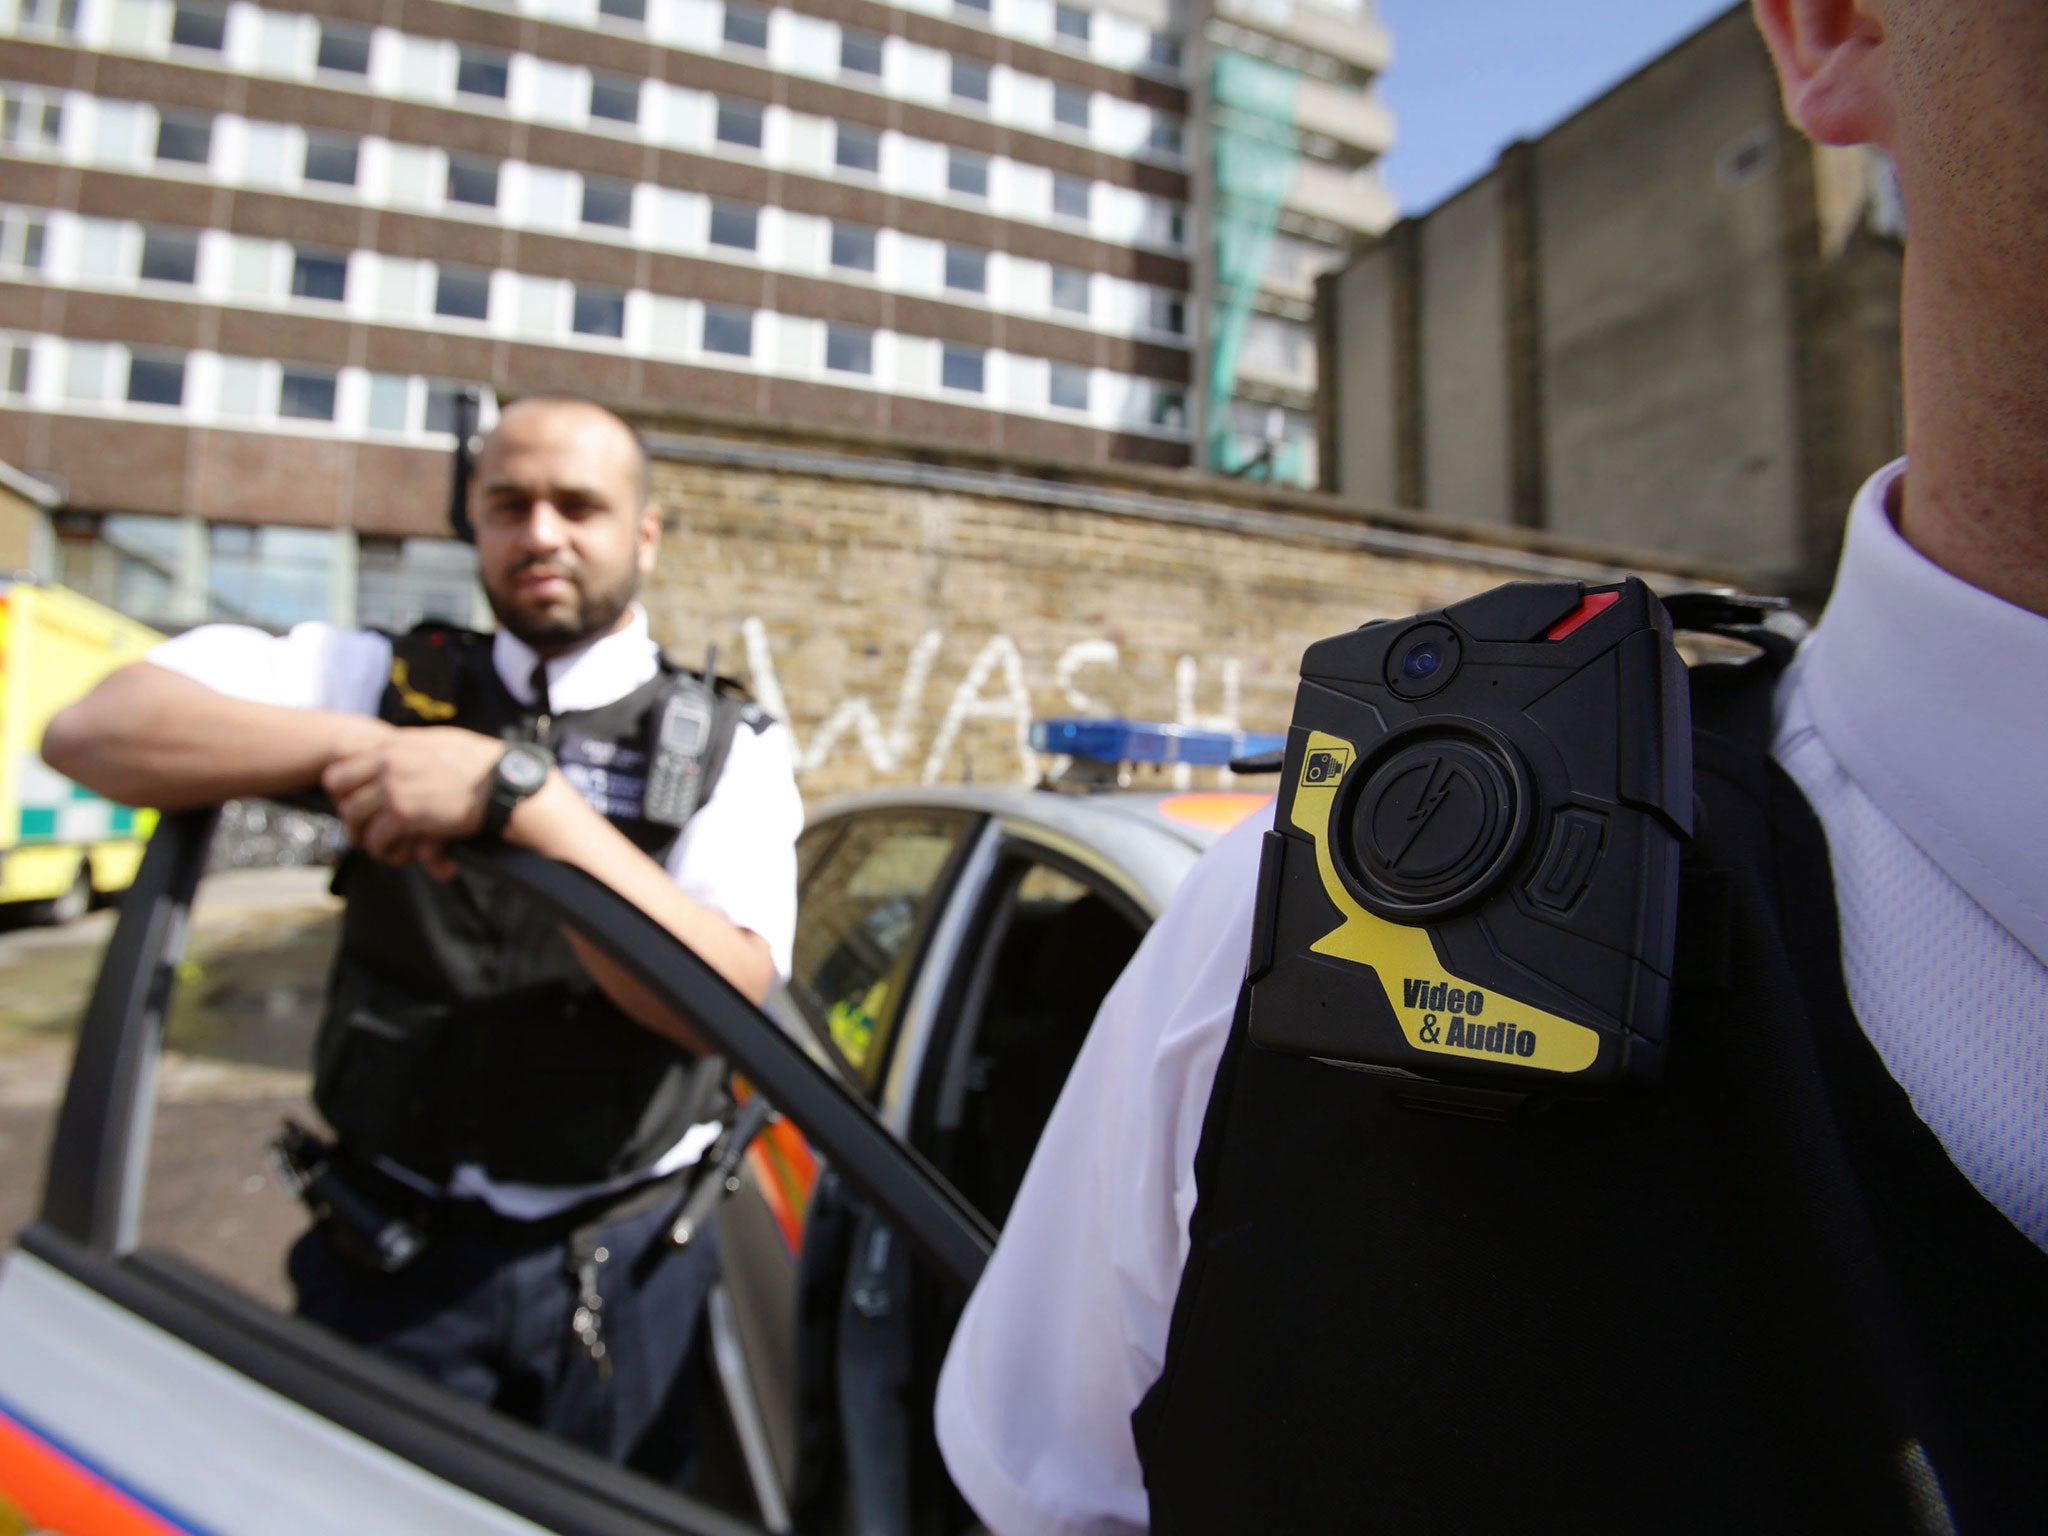 Body-worn cameras are being trialled